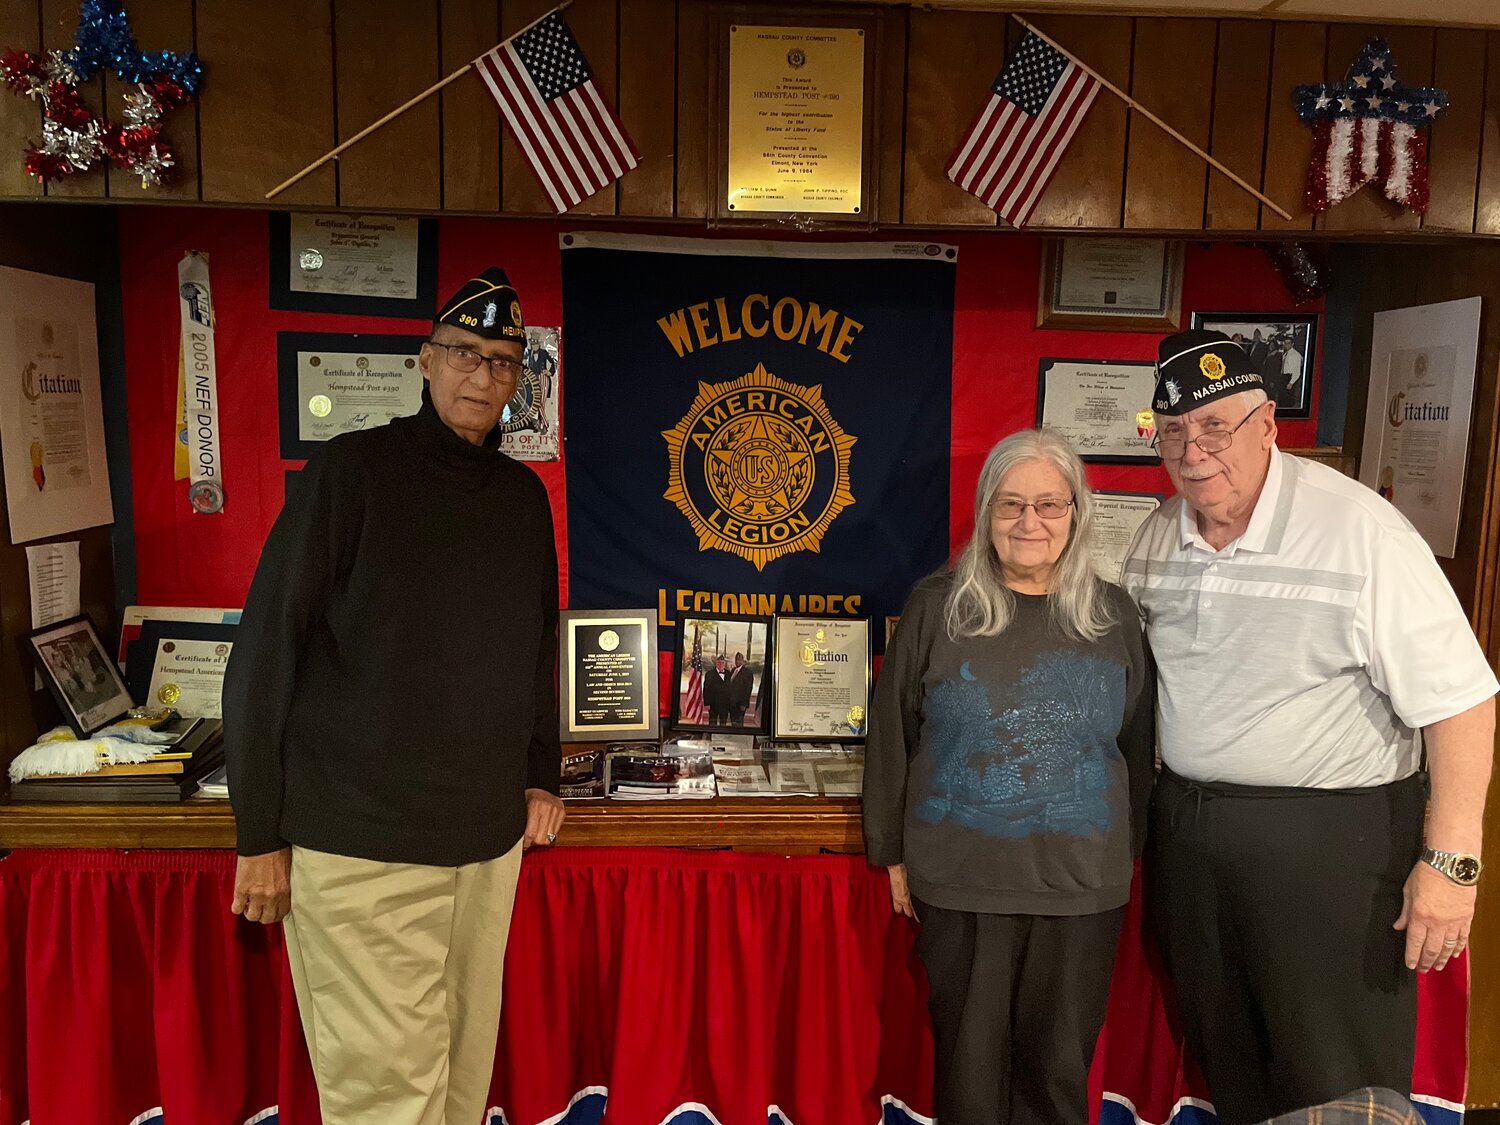 Board members of the American Legion Post 390, the largest veterans' organization in the country, dedicated to advocating for and supporting veterans, service members, and their communities by offering them much-needed resources like access to counseling, free and low-cost healthcare services, access to food pantries and more — located in the Village of Hempstead. From left: Harry Ransom, Mary Burns, Frank Neal